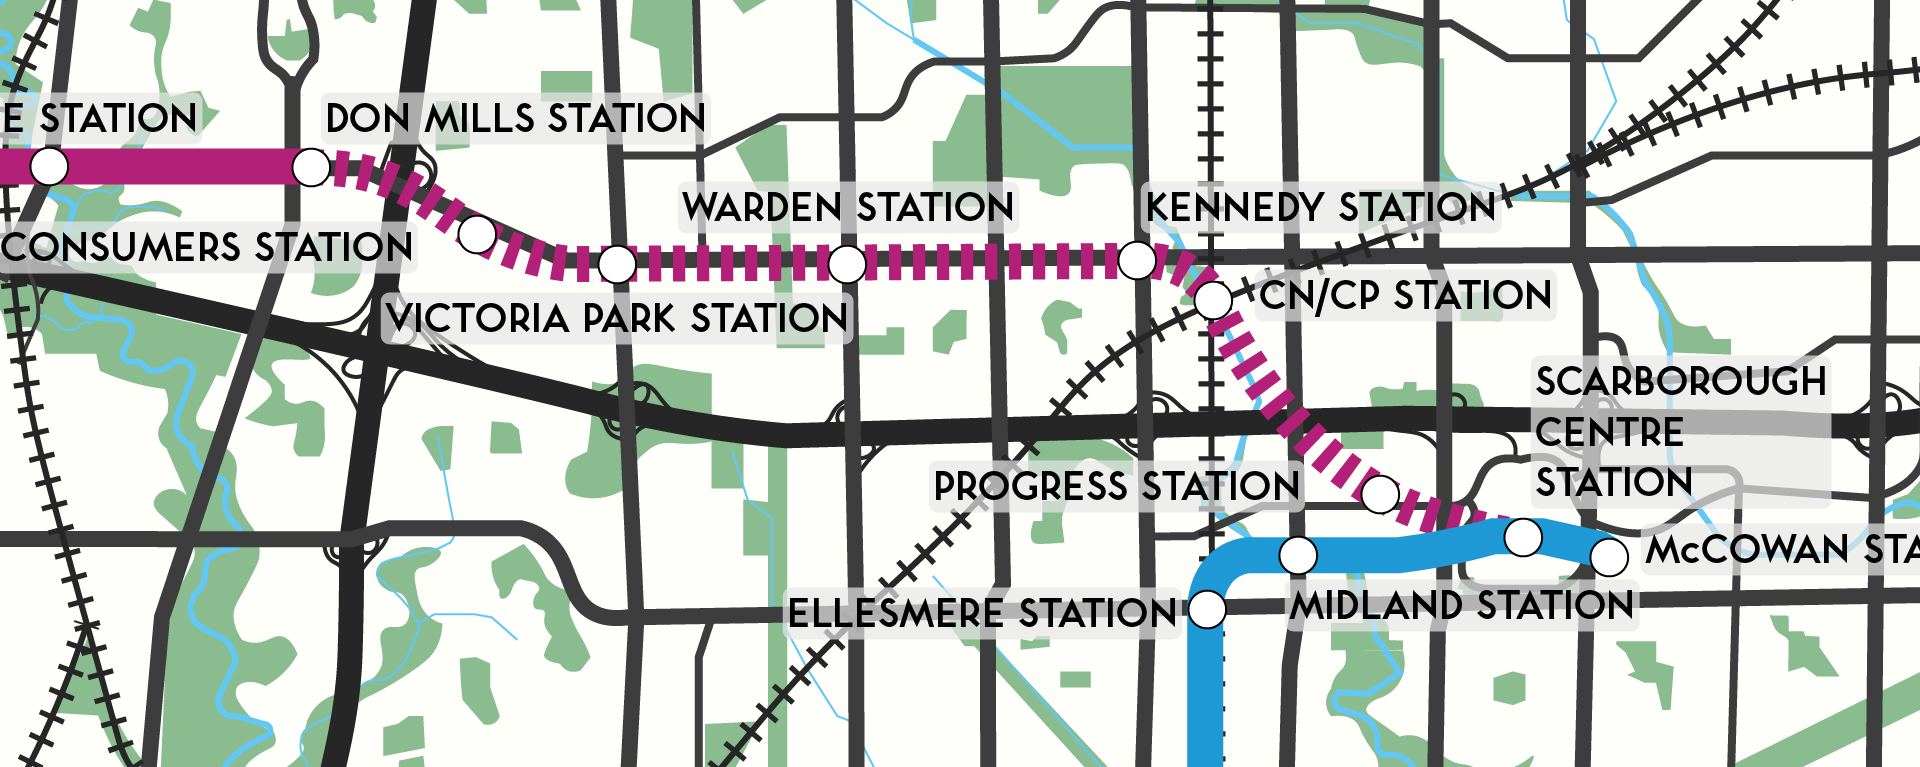 This image shows the proposed extension of the Sheppard subway eastwards, with six new stations at Consumers Road, Victoria Park Avenue, Warden Avenue, Kennedy Road, the CN/CP rail interchange, and Progress Avenue. A new connection to a proposed re-built Scarborough Rapid Transit line in the form of an extension of the proposed Eglinton Crosstown LRT would be made at Scarborough Centre Station.